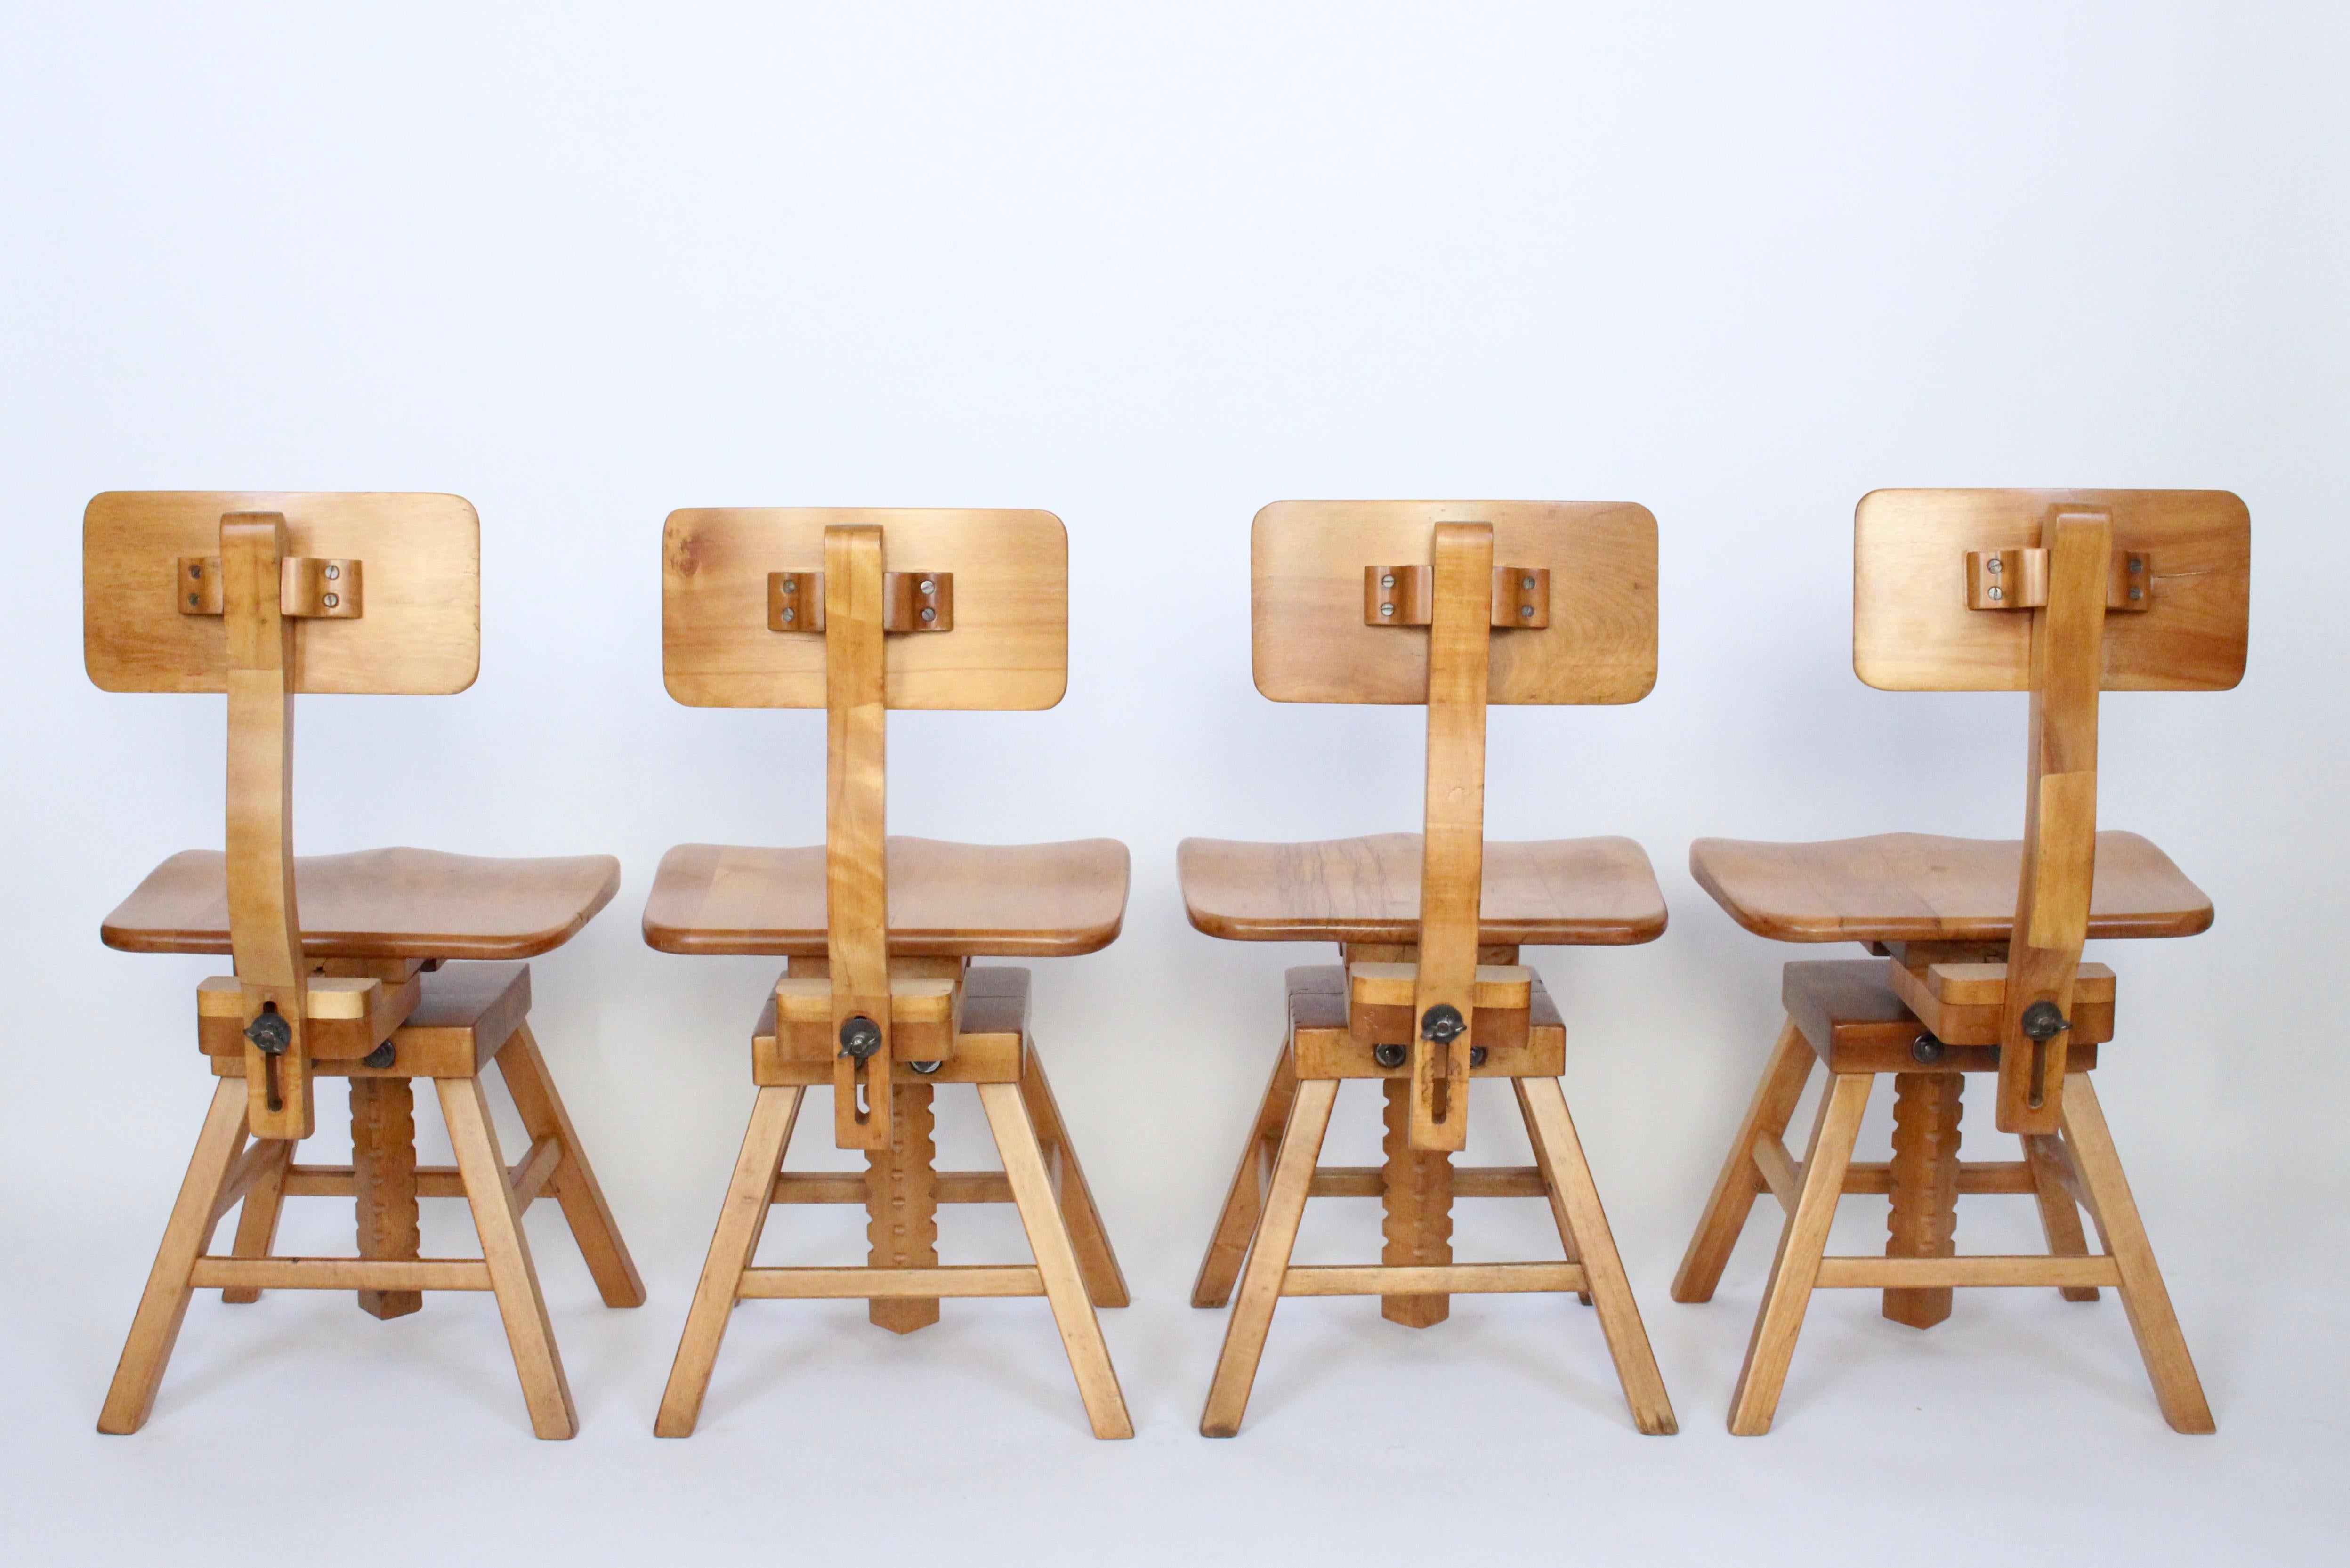 Industrial Set of Four Edward L. Koenig Adjustable Architects Chairs in Maple, circa 1940